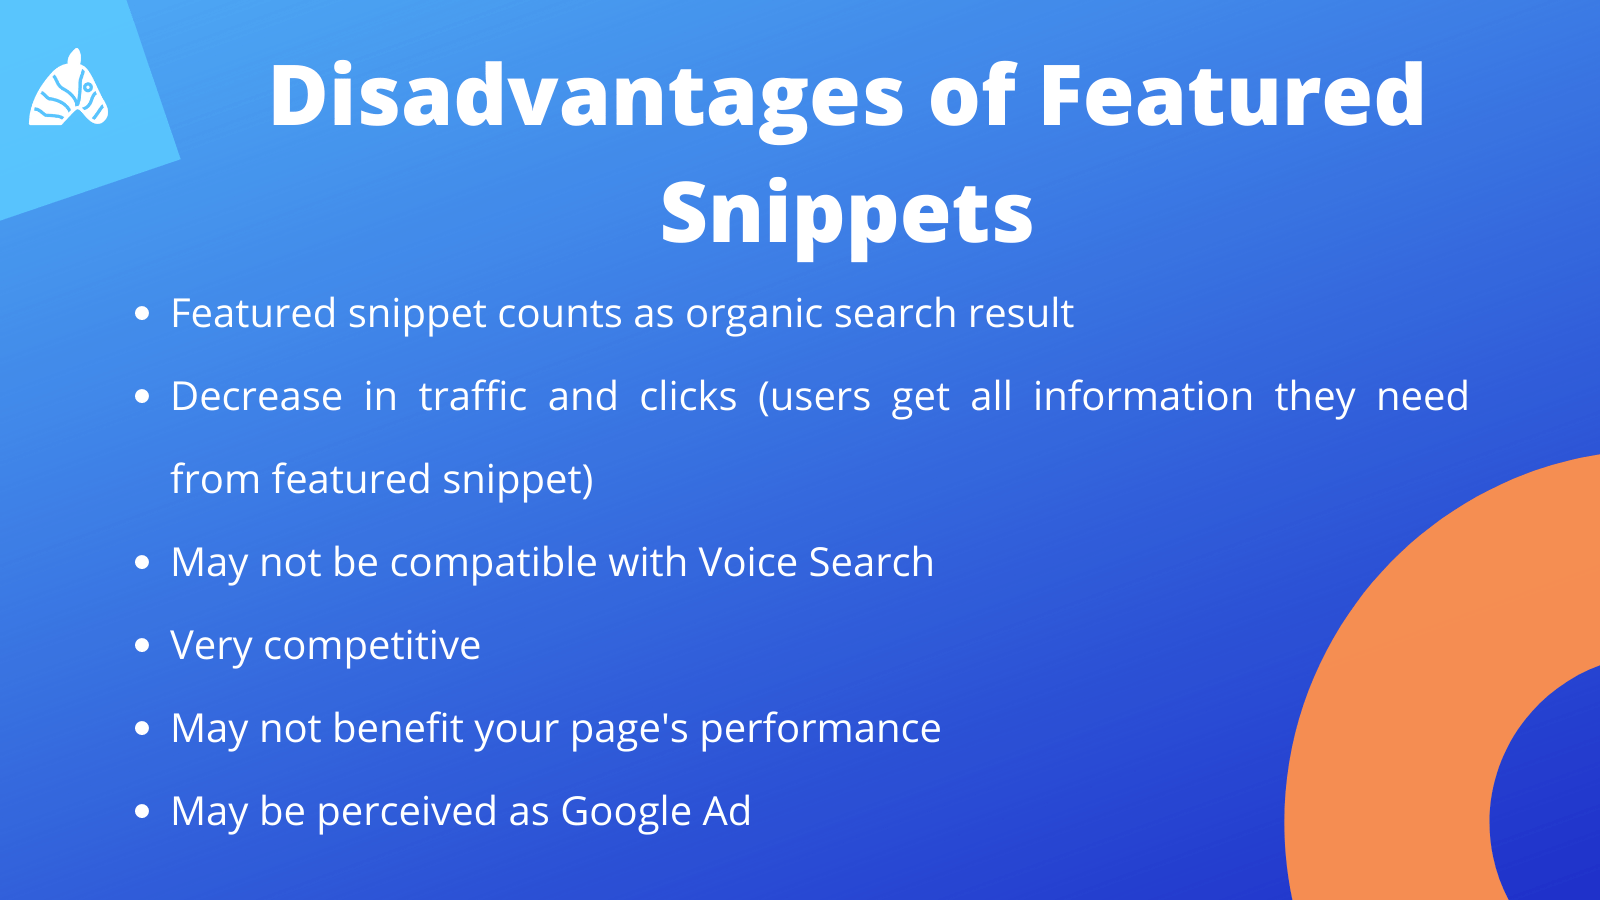 disadvantages of featured snippets compared to position 1 on Google